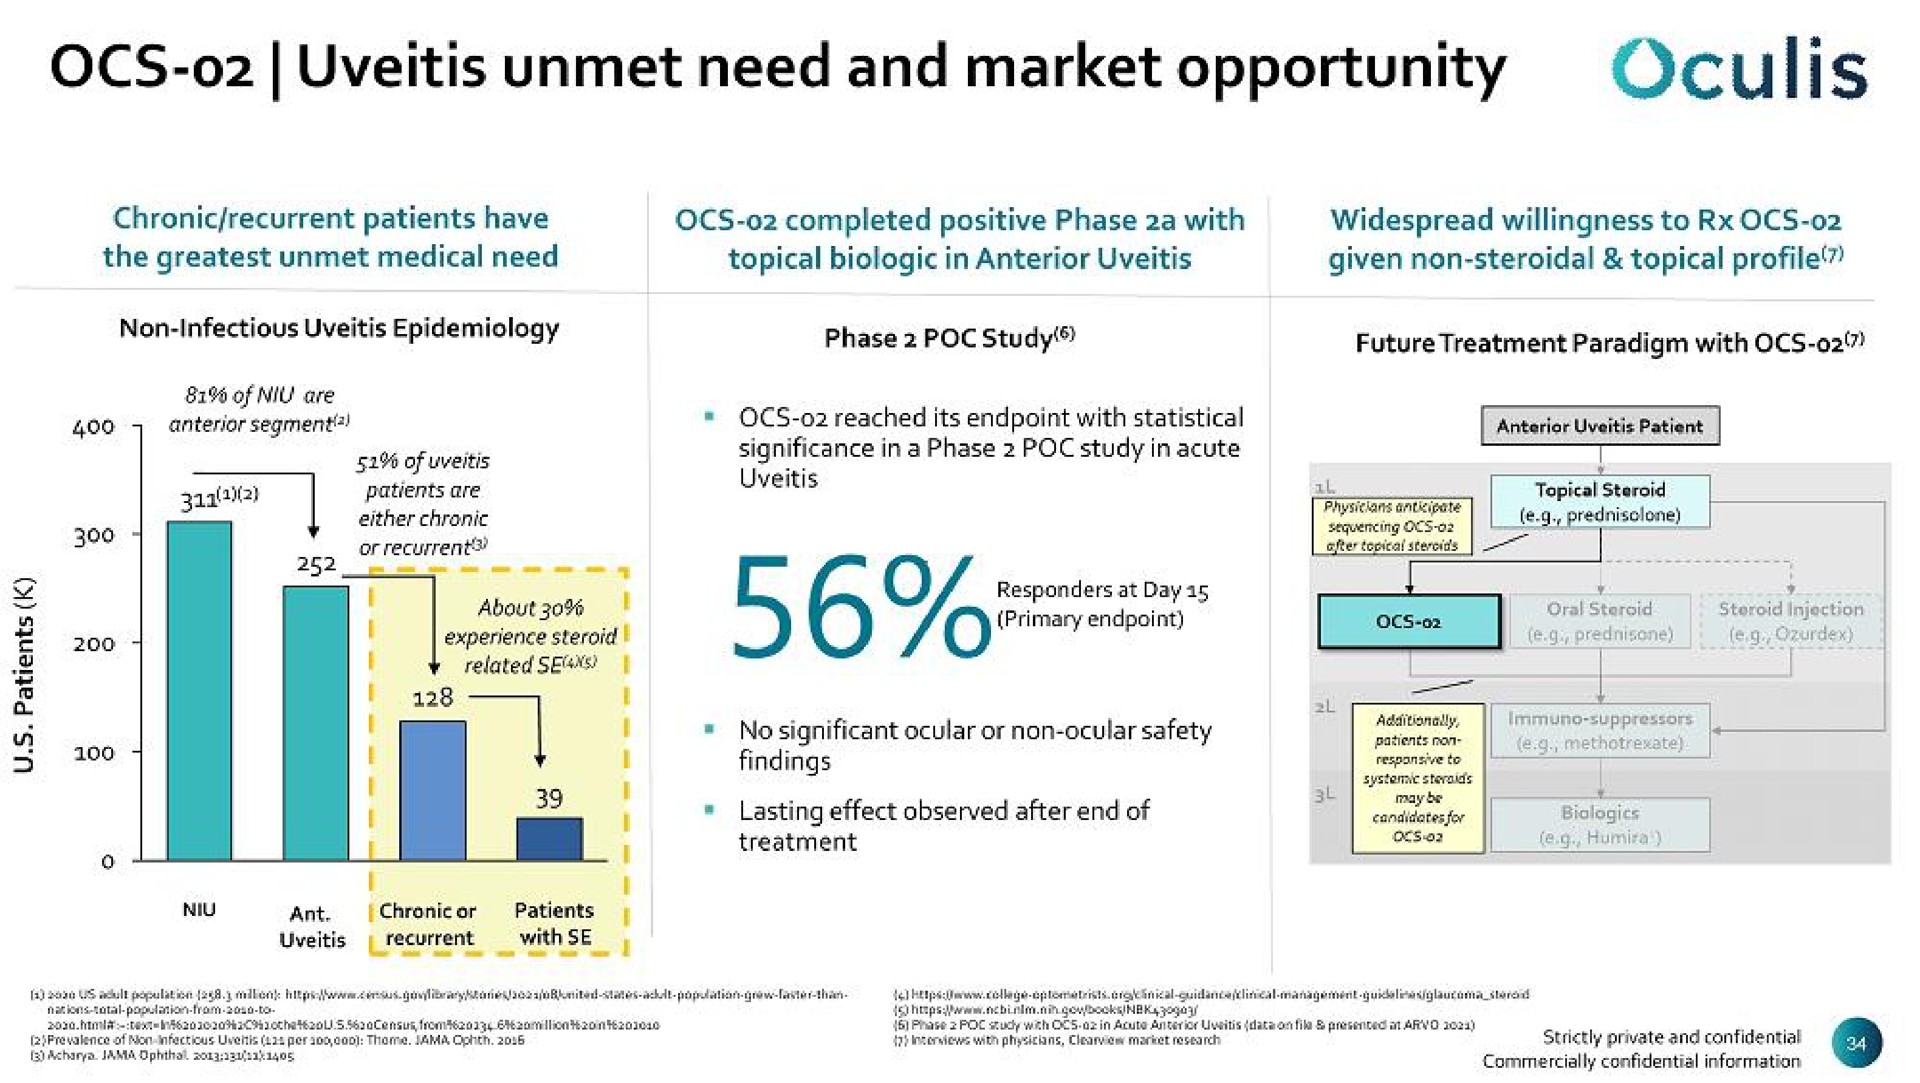 uveitis unmet need and market opportunity | Oculis